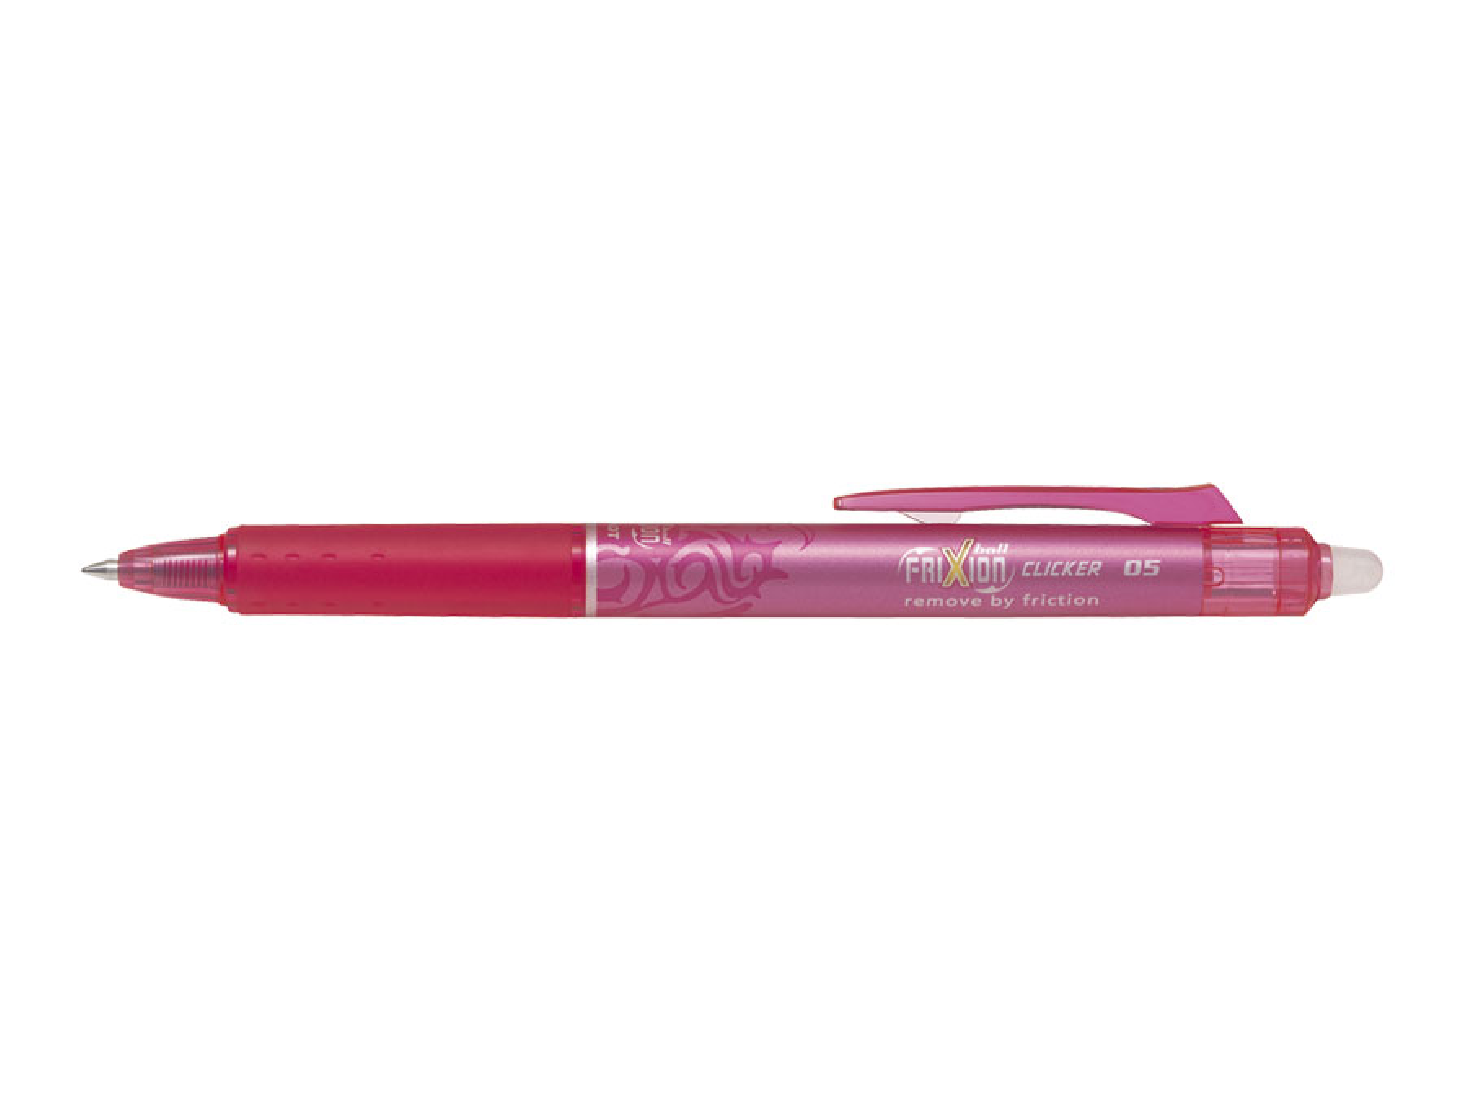 Ball Pen Frixion Clicker 0.5 Red(Στυλό που σβήνει)Pilot